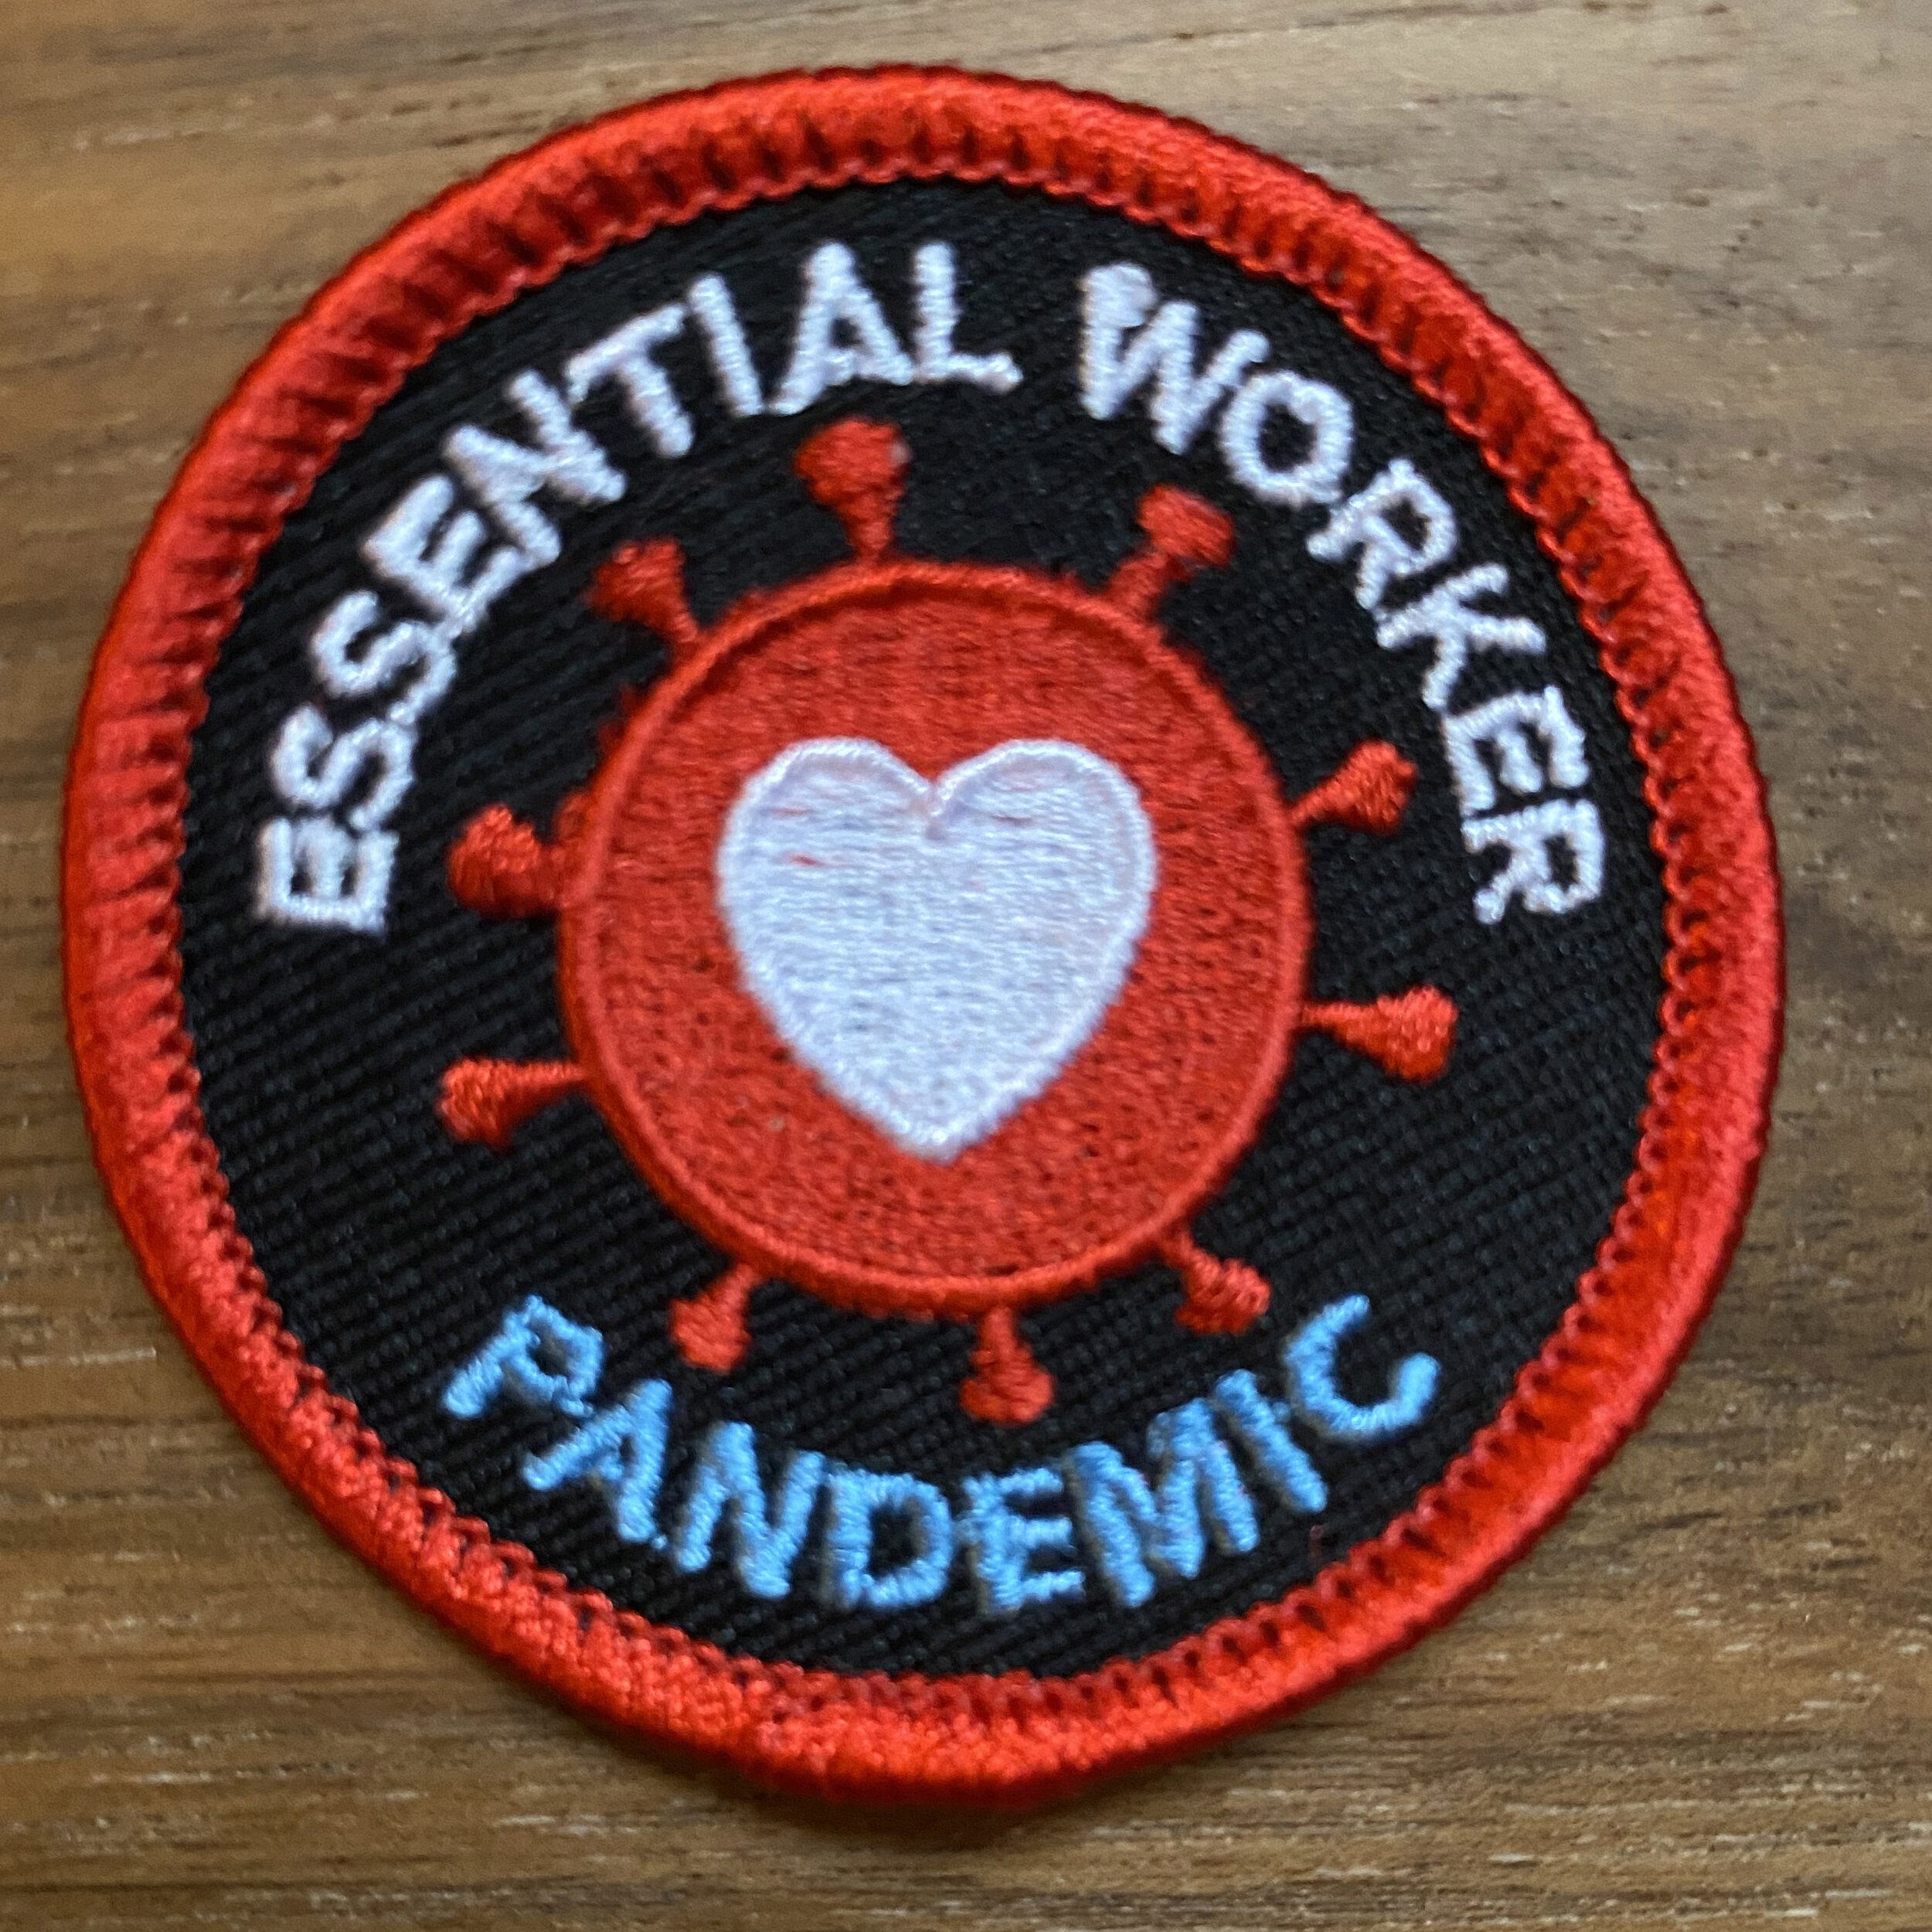 Essential Worker patch